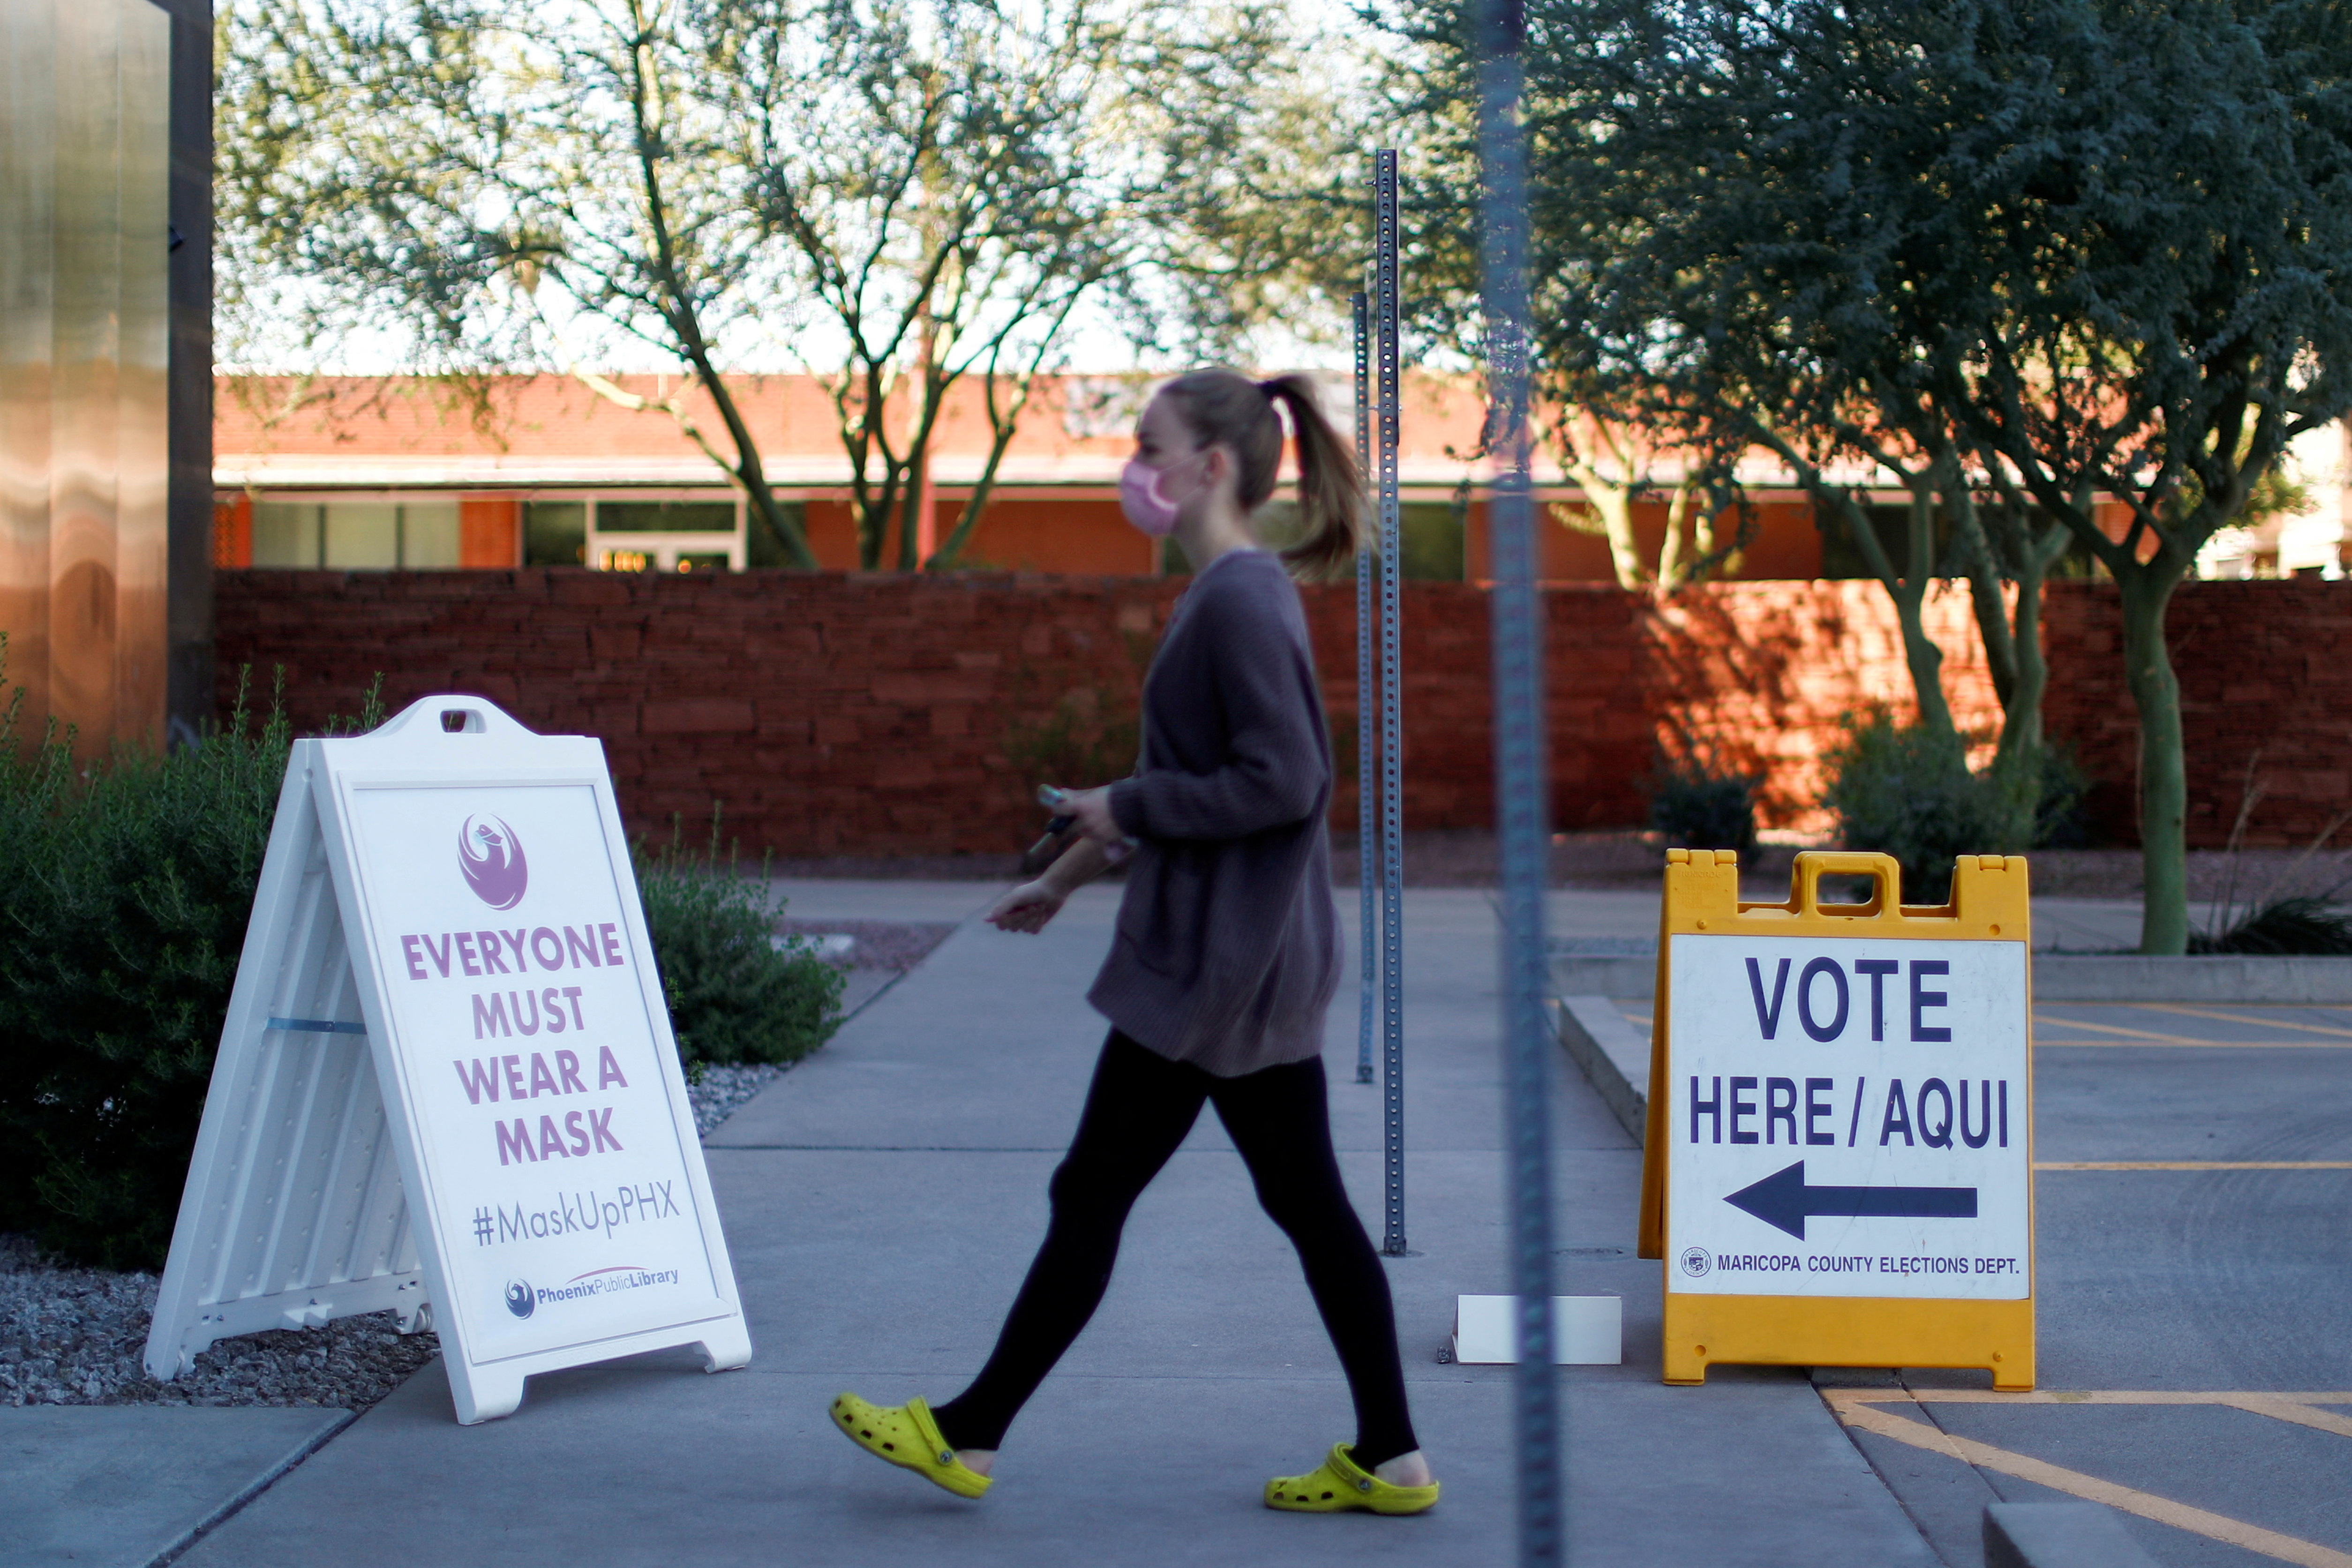 A woman walks to cast her ballot at the register of voters during early voting in Phoenix, Arizona